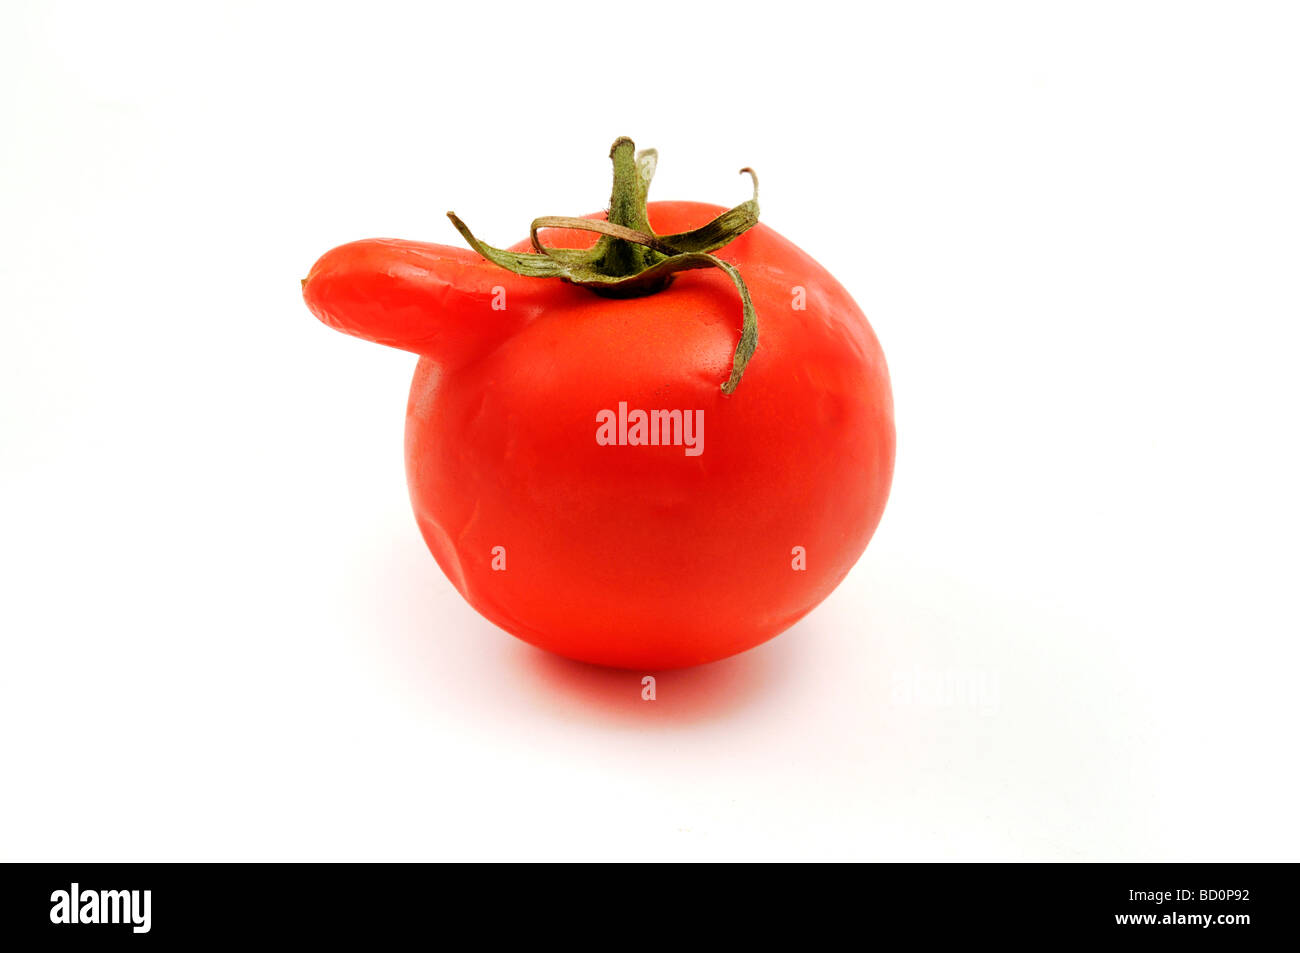 Deformed tomato on a white background Stock Photo